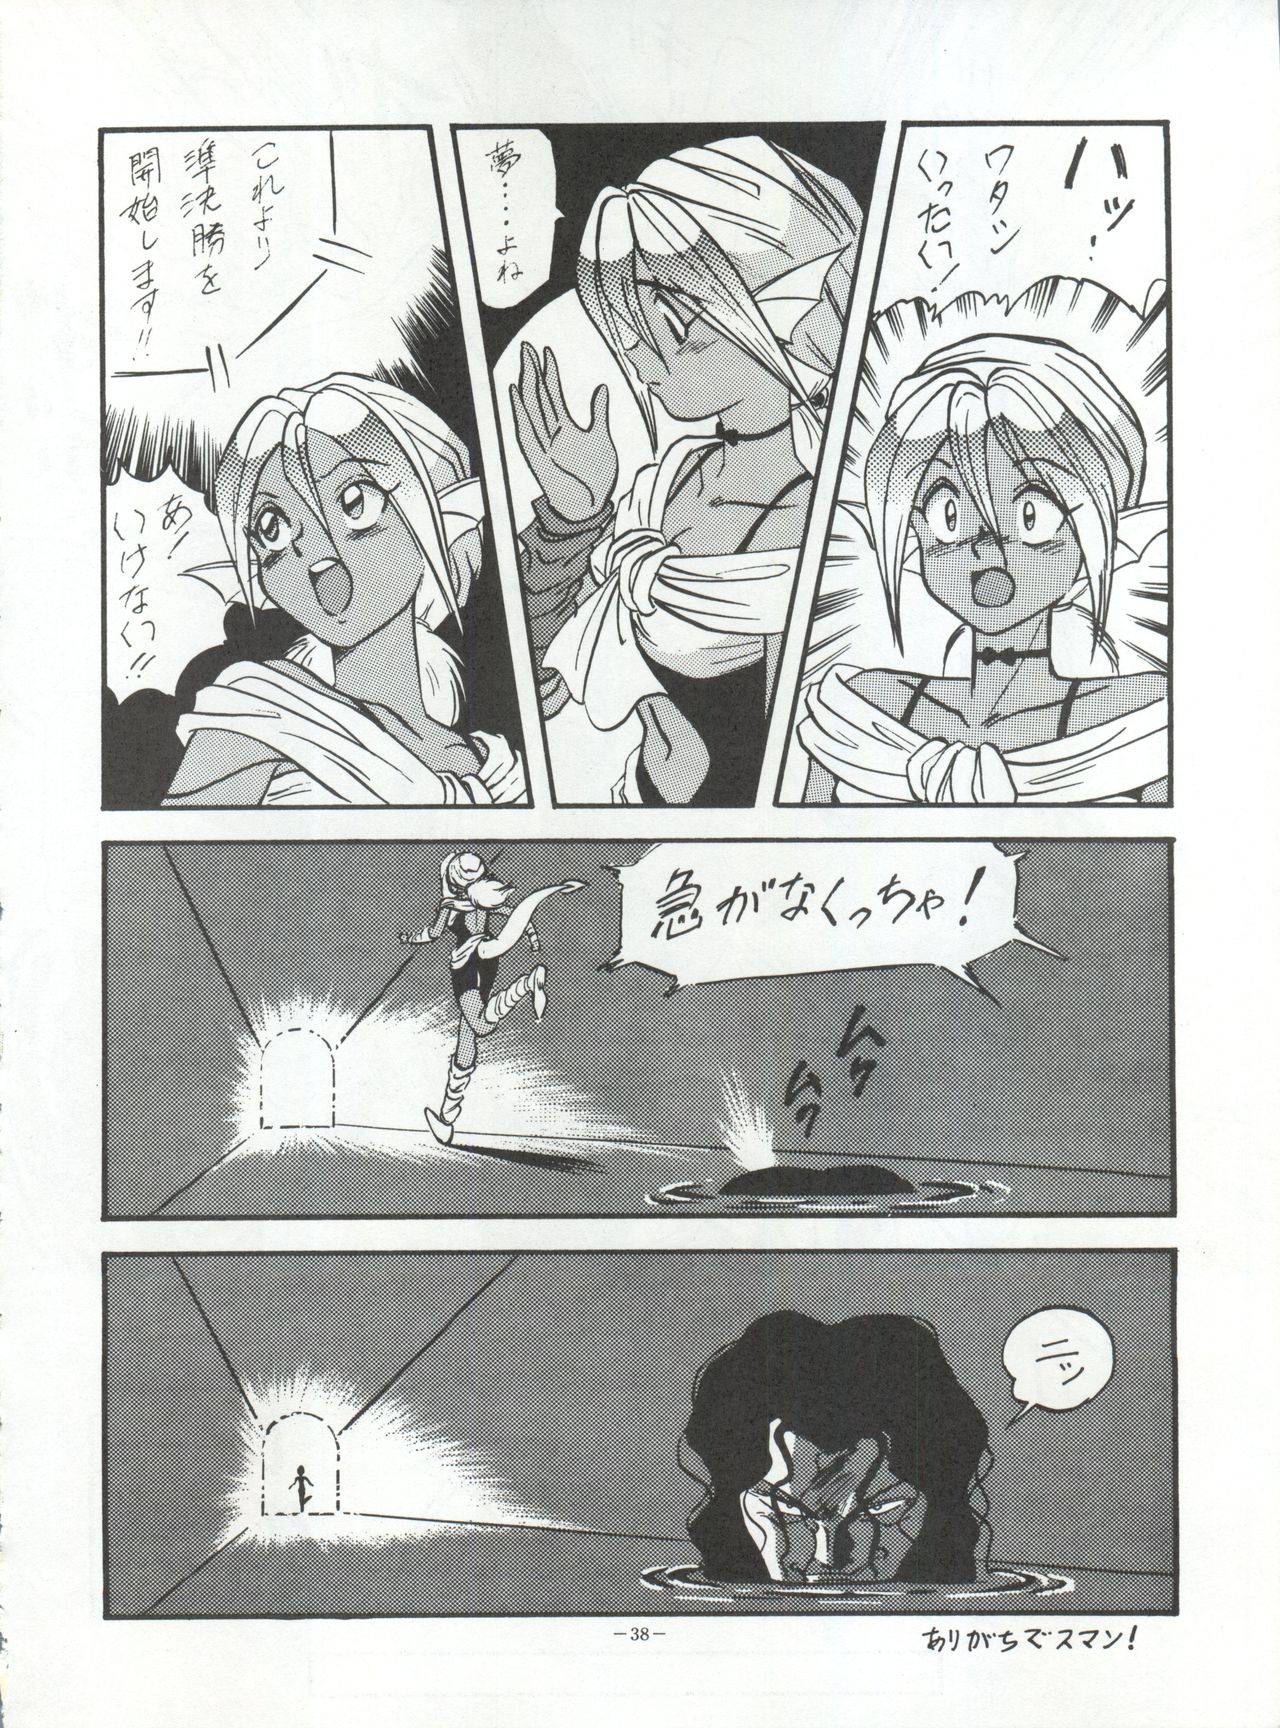 (CR15) [ALPS (Various)] LOOK OUT 30 (Various) page 38 full